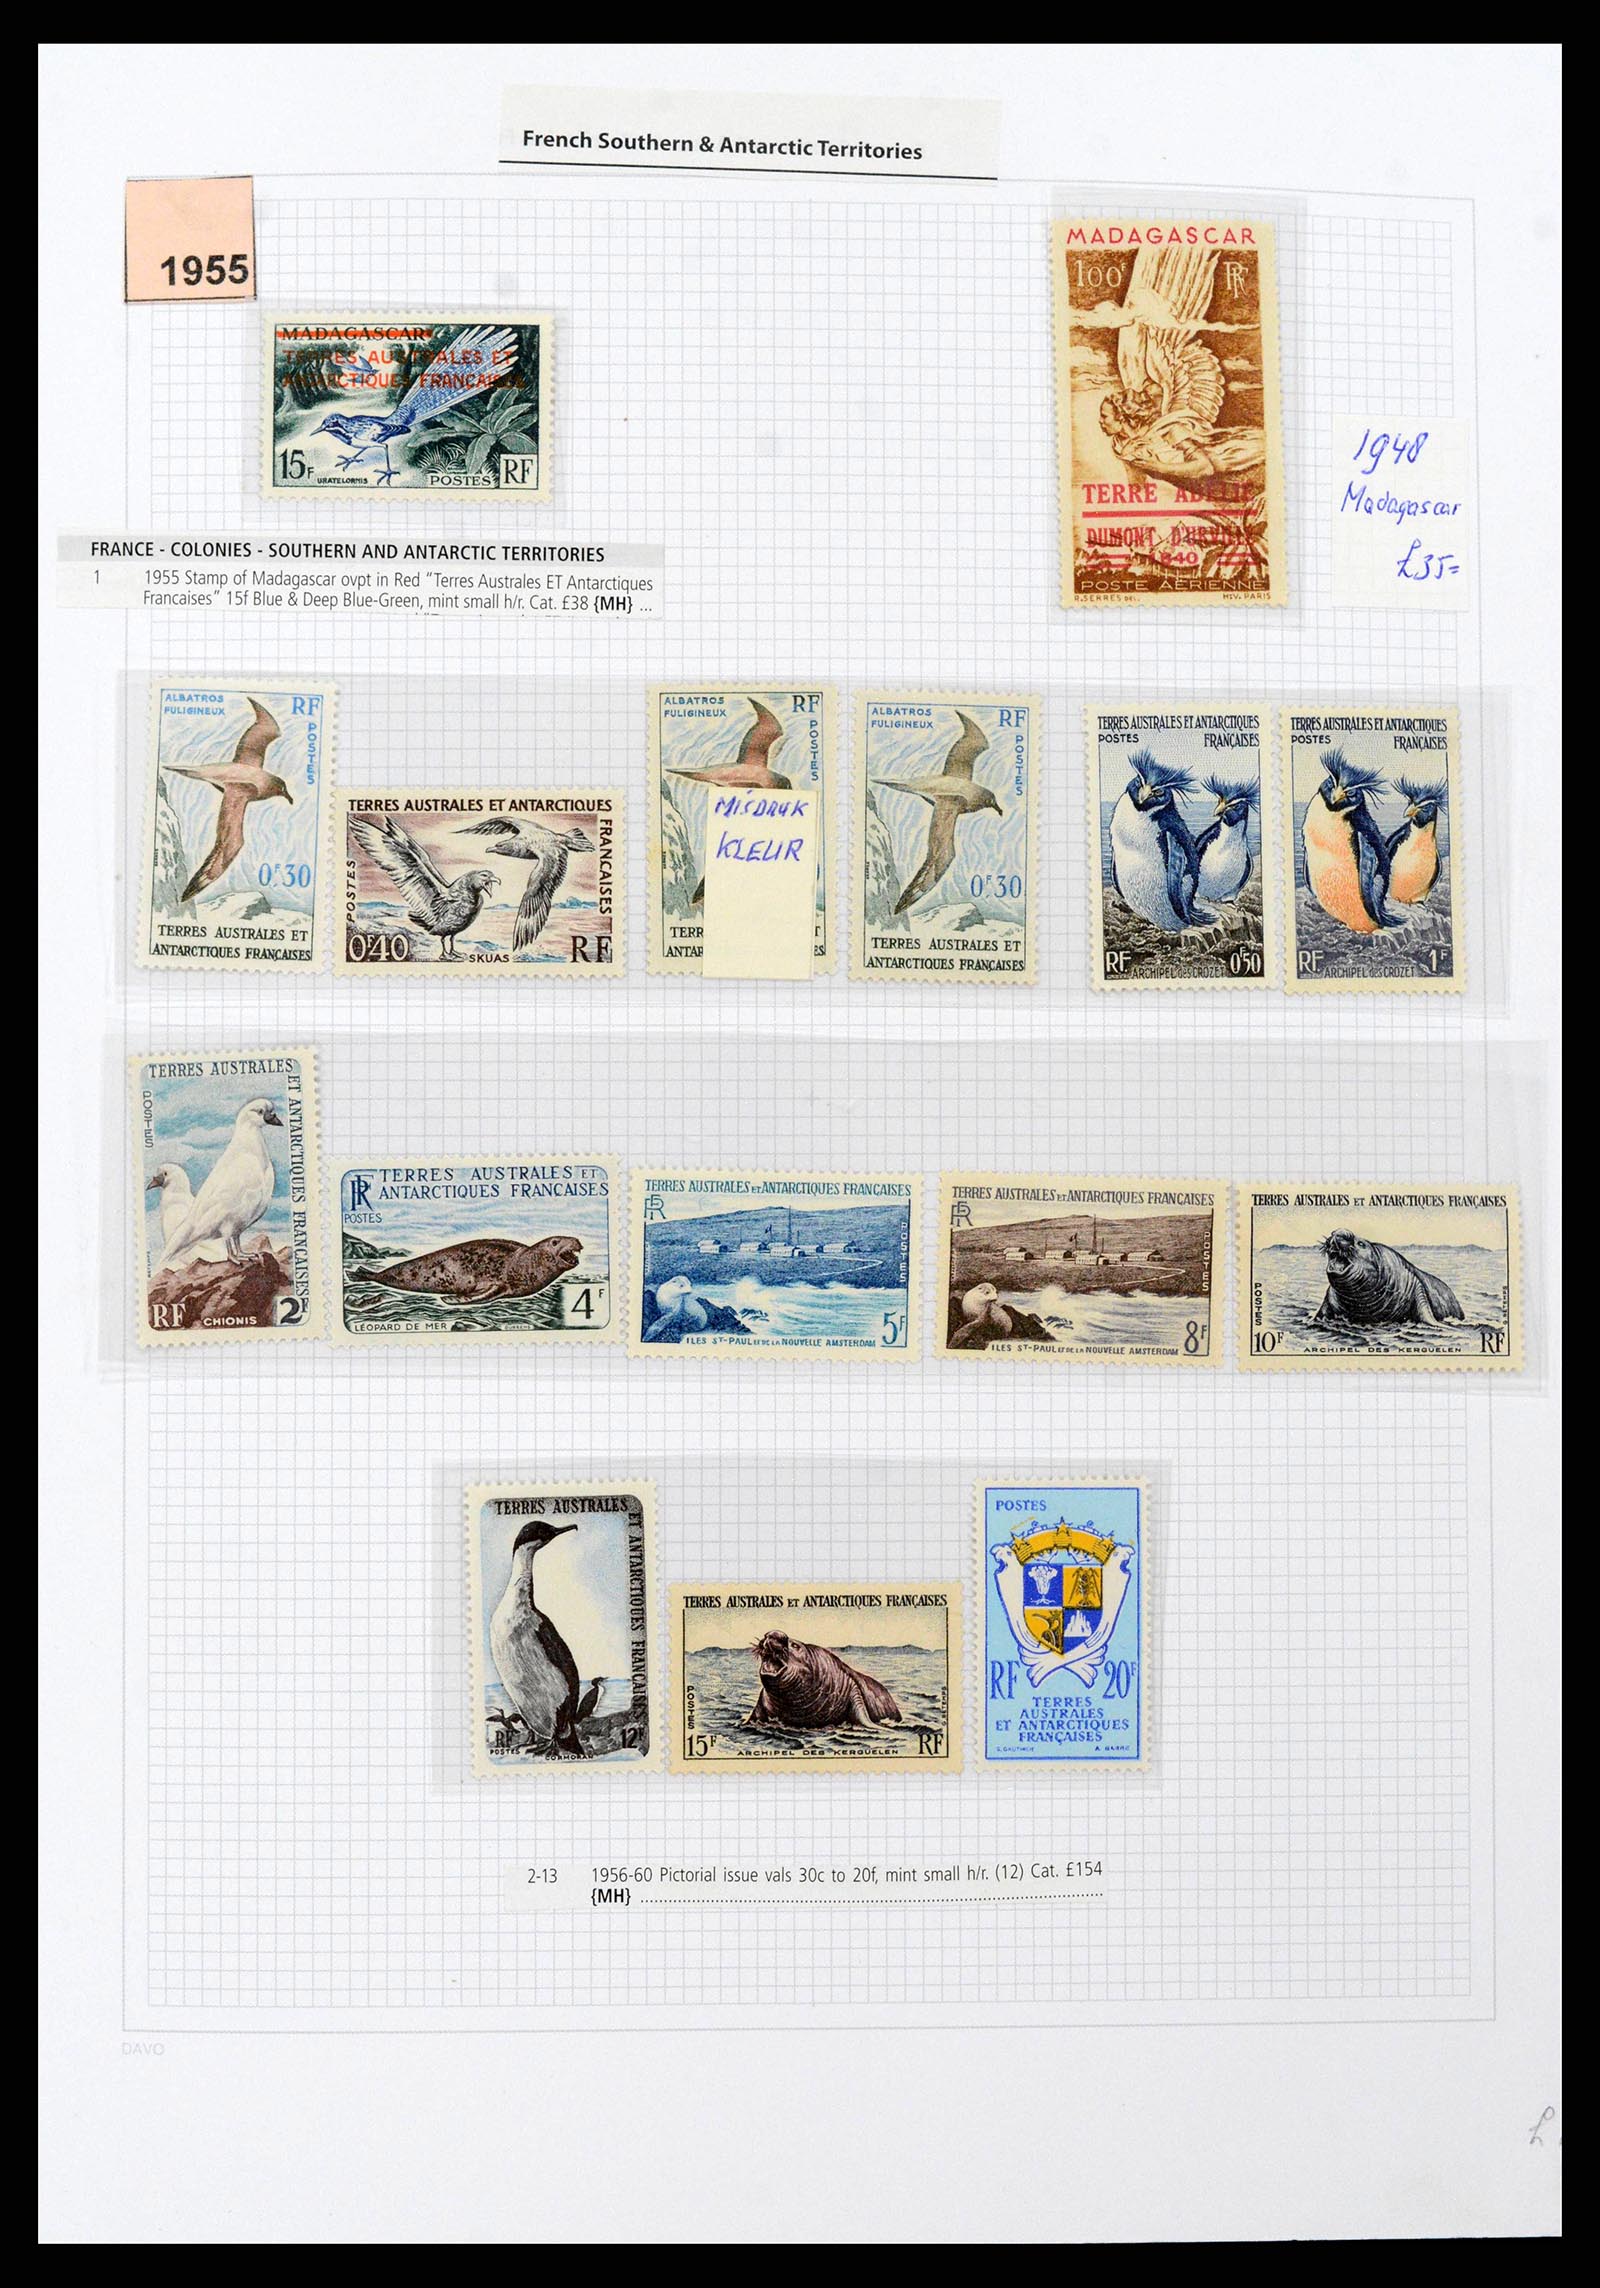 Lot 37360 Well filled stamp collection Hungary 1871-1983 in 5 albums.